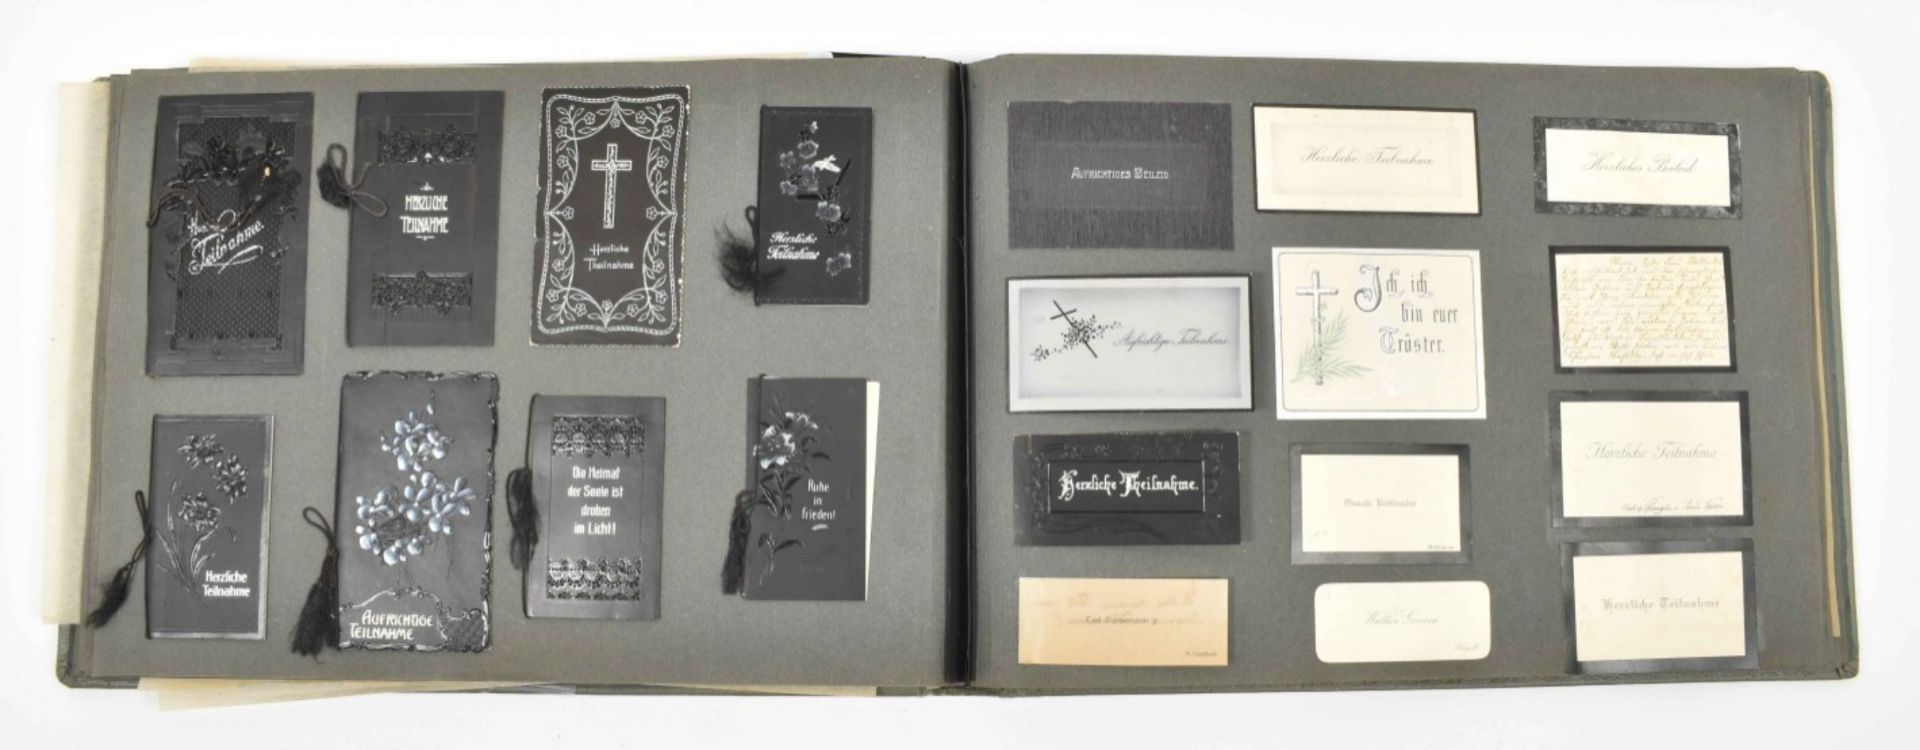 Memorial album on the death of Georg Hollender on 13 January 1913